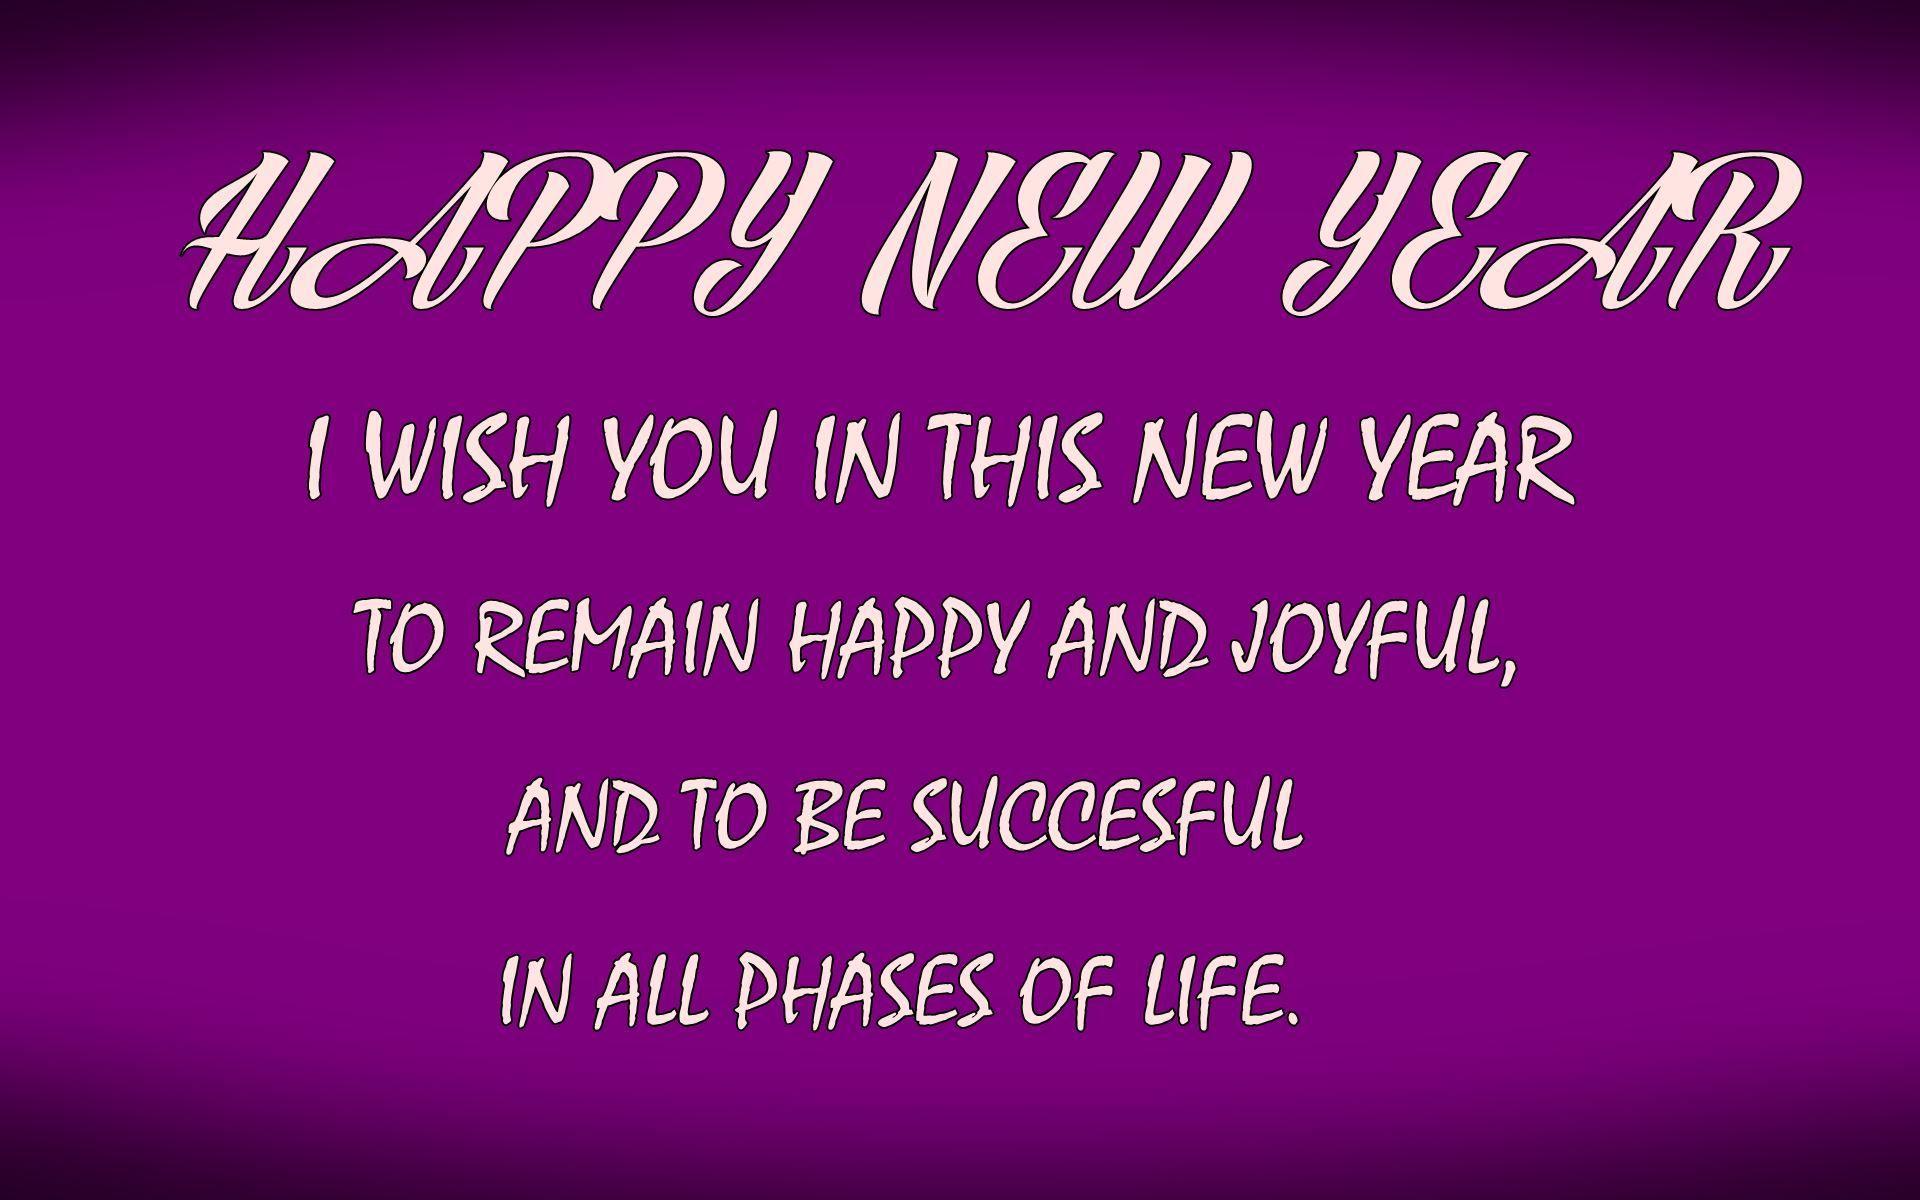 Happy New Year Greetings Quotes 2016 HD Wallpaper